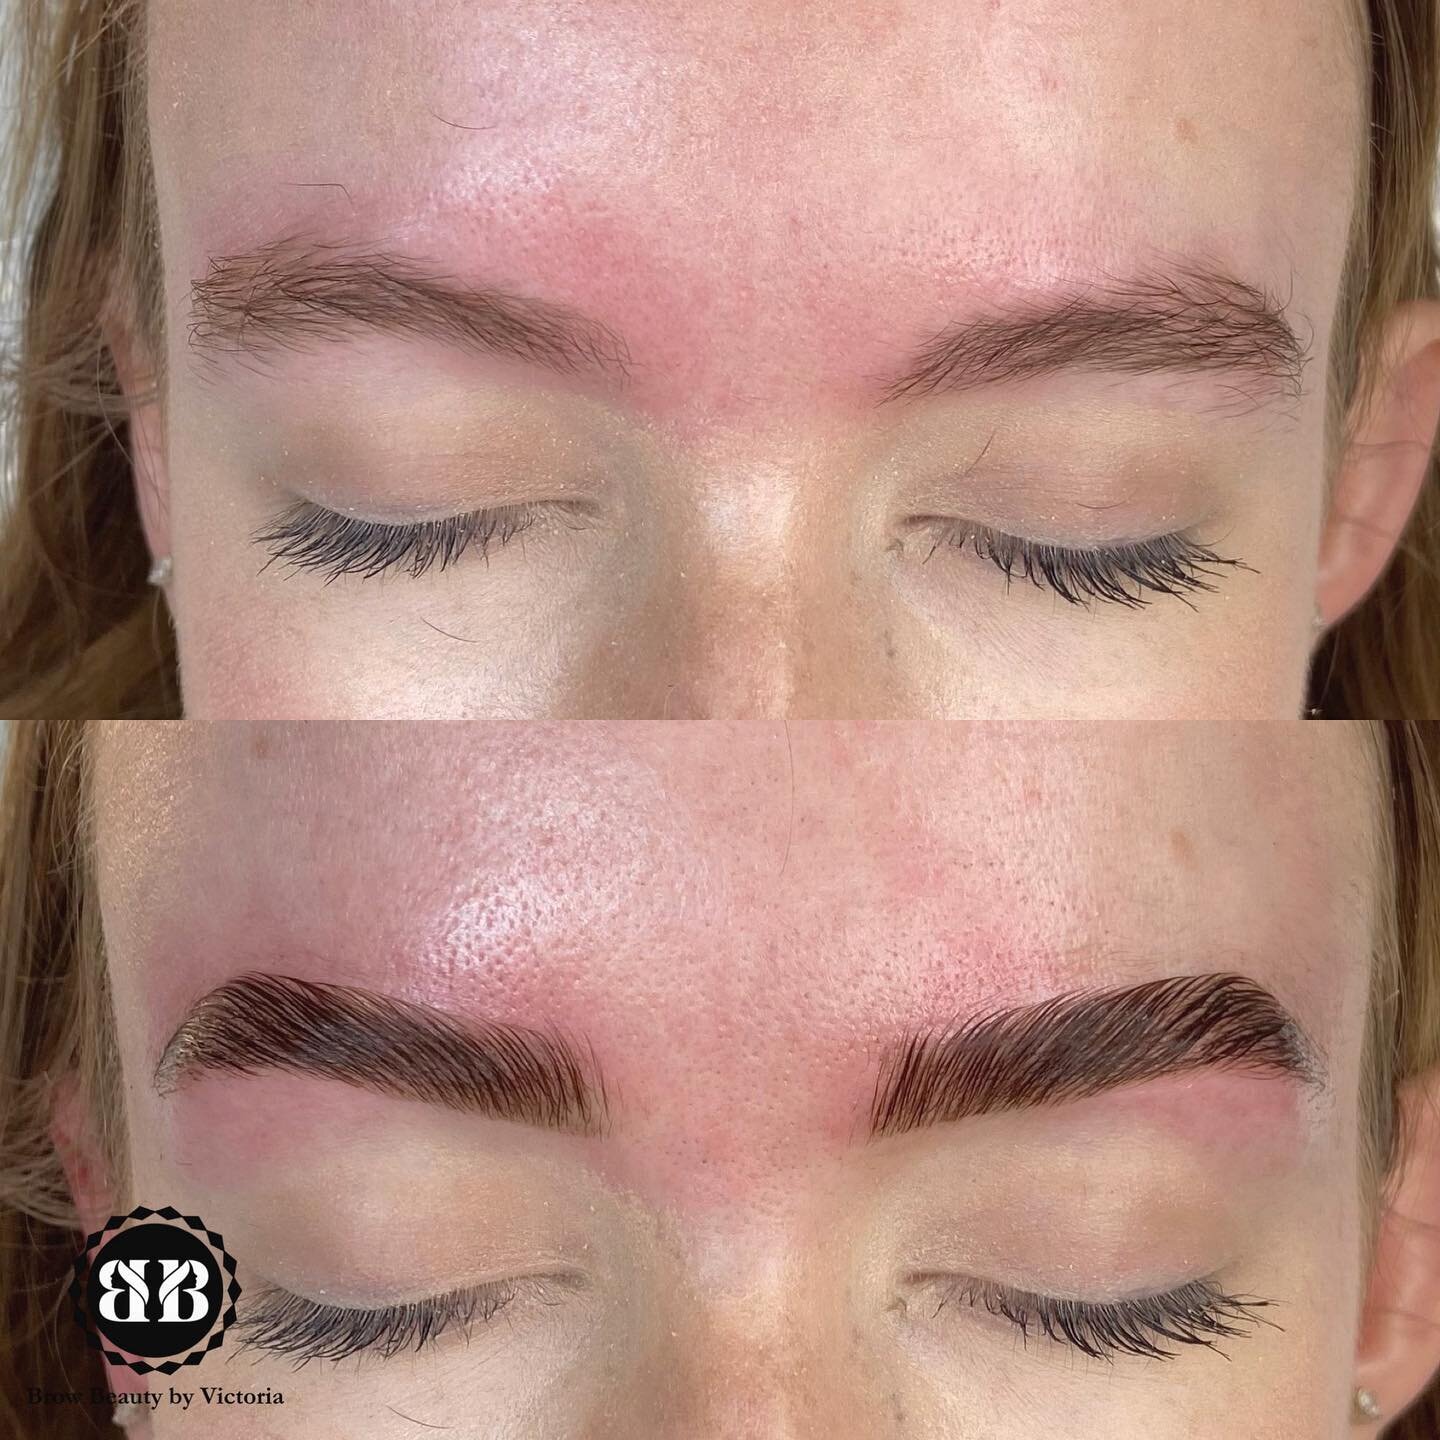 Brow lamination 🎇

Lamination allows your hairs to be manipulated. 
Tint makes your brows look bolder/darker.
Mapping is done and any hairs outside of the shape mapped are removed to reshape your brows in a manner that is most complementary to your 